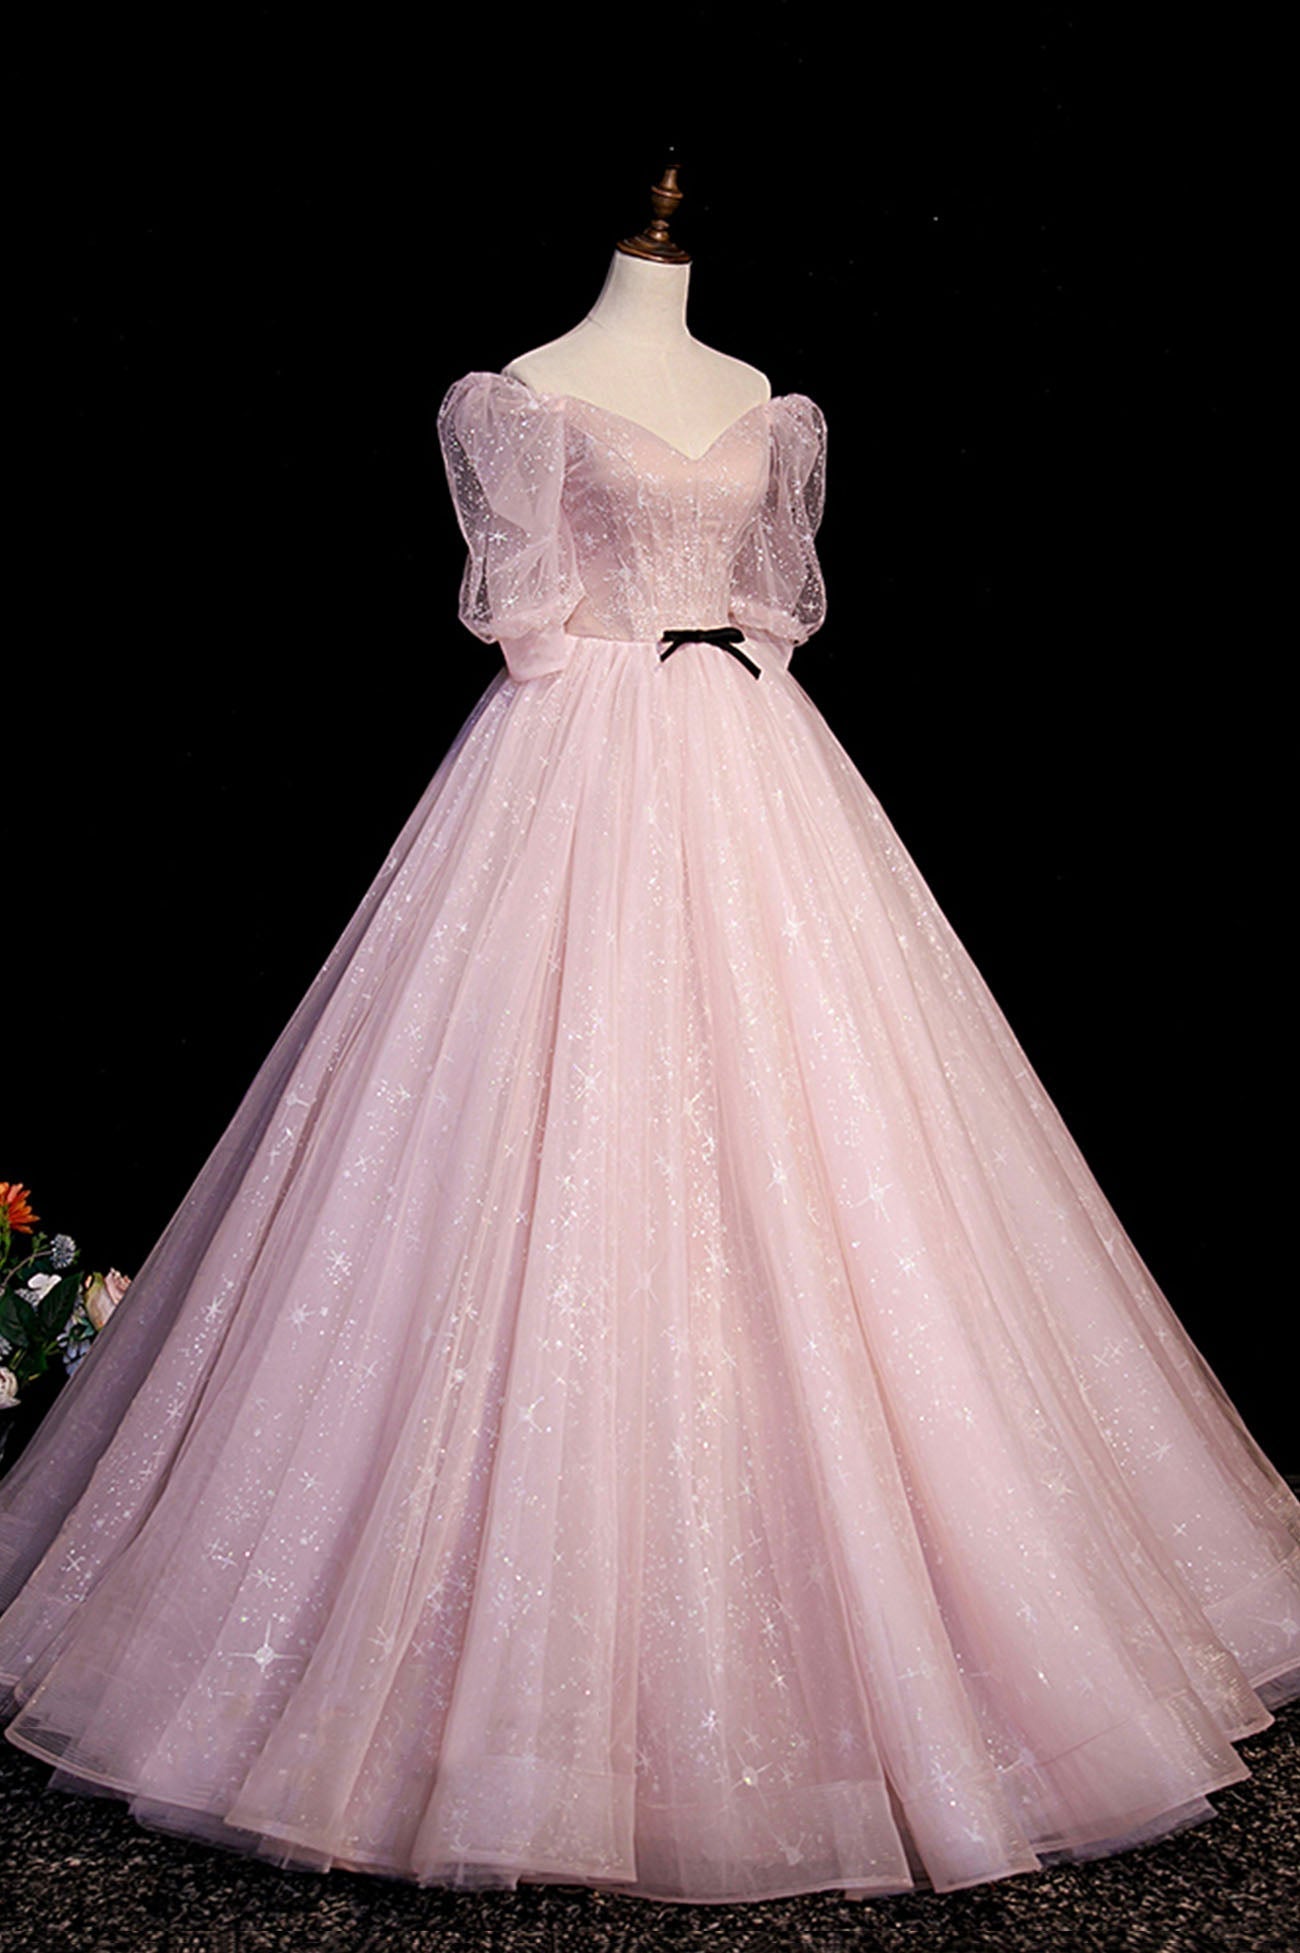 Homecomeing Dresses Long, Pink V-Neck Tulle Long Prom Dress, A-Line Short Sleeves Evening Dress